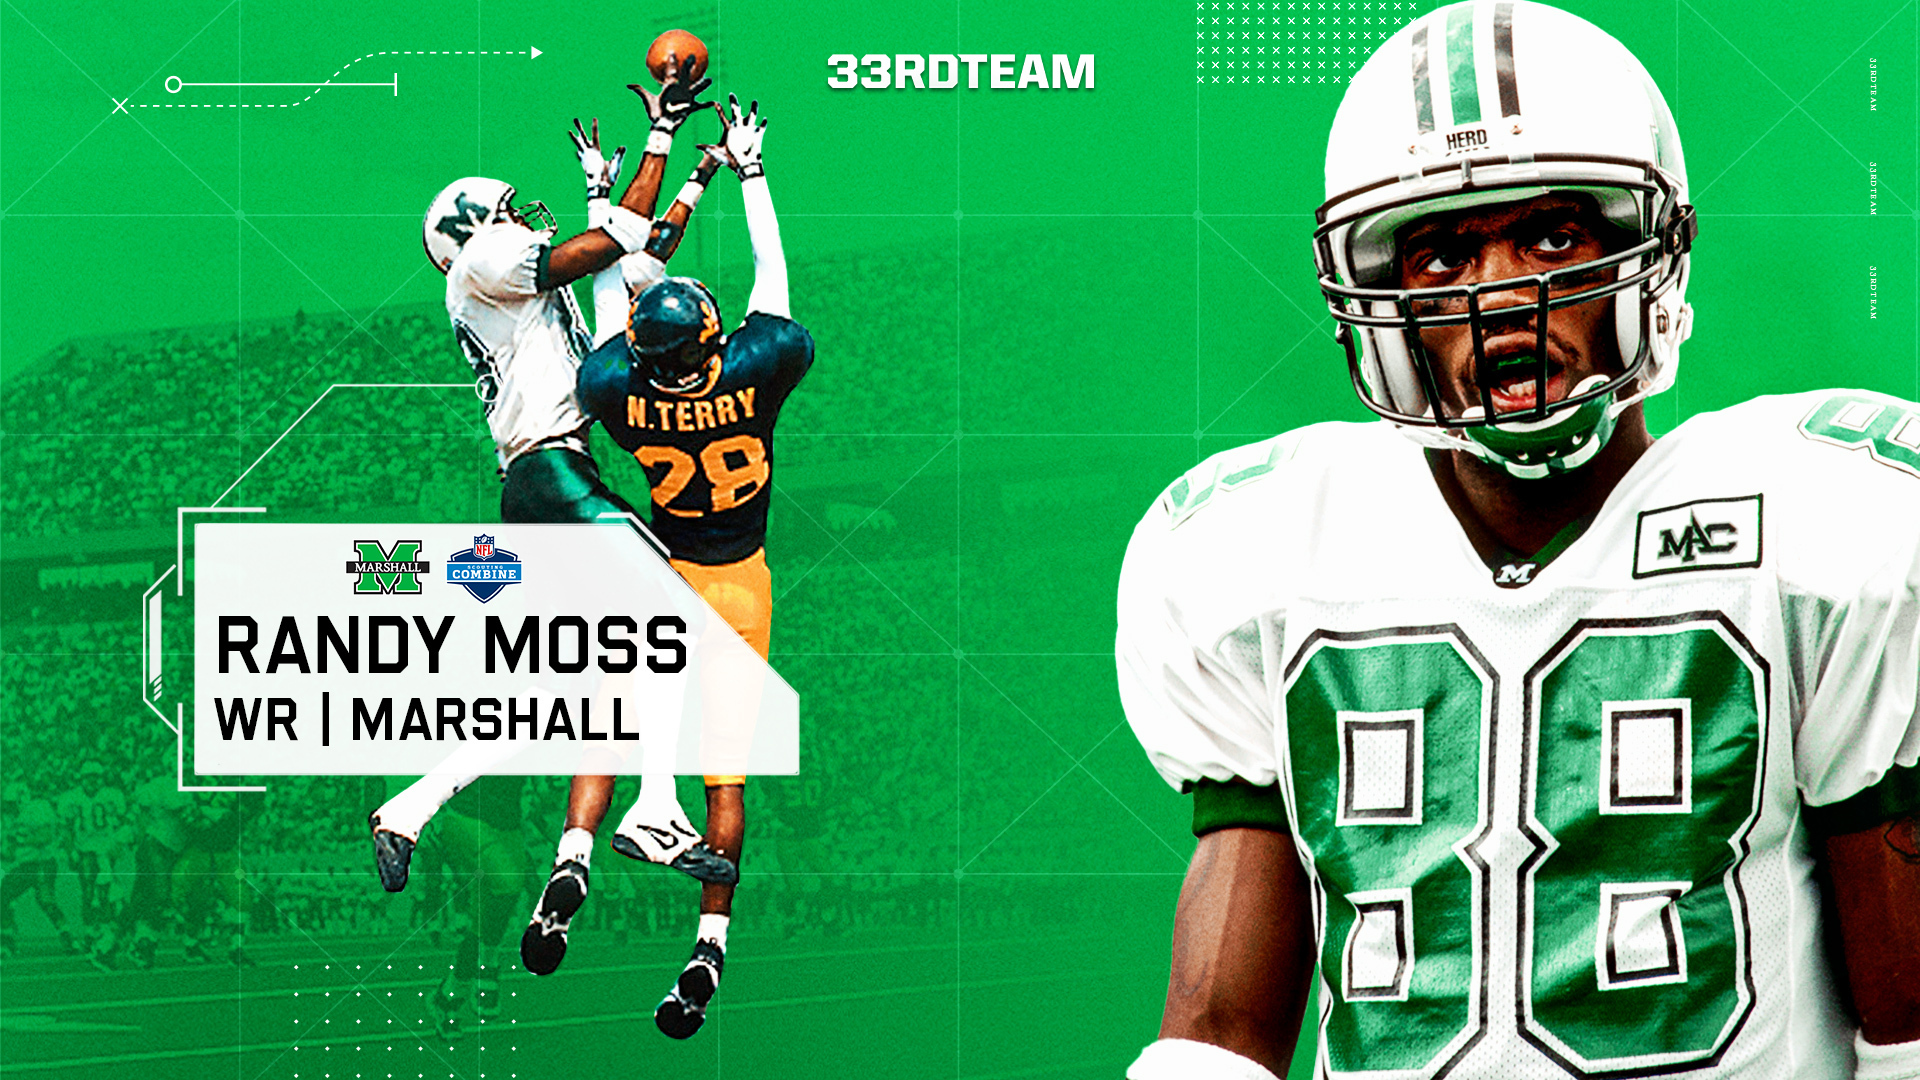 Remembering Drafting Randy Moss 25 Years Later